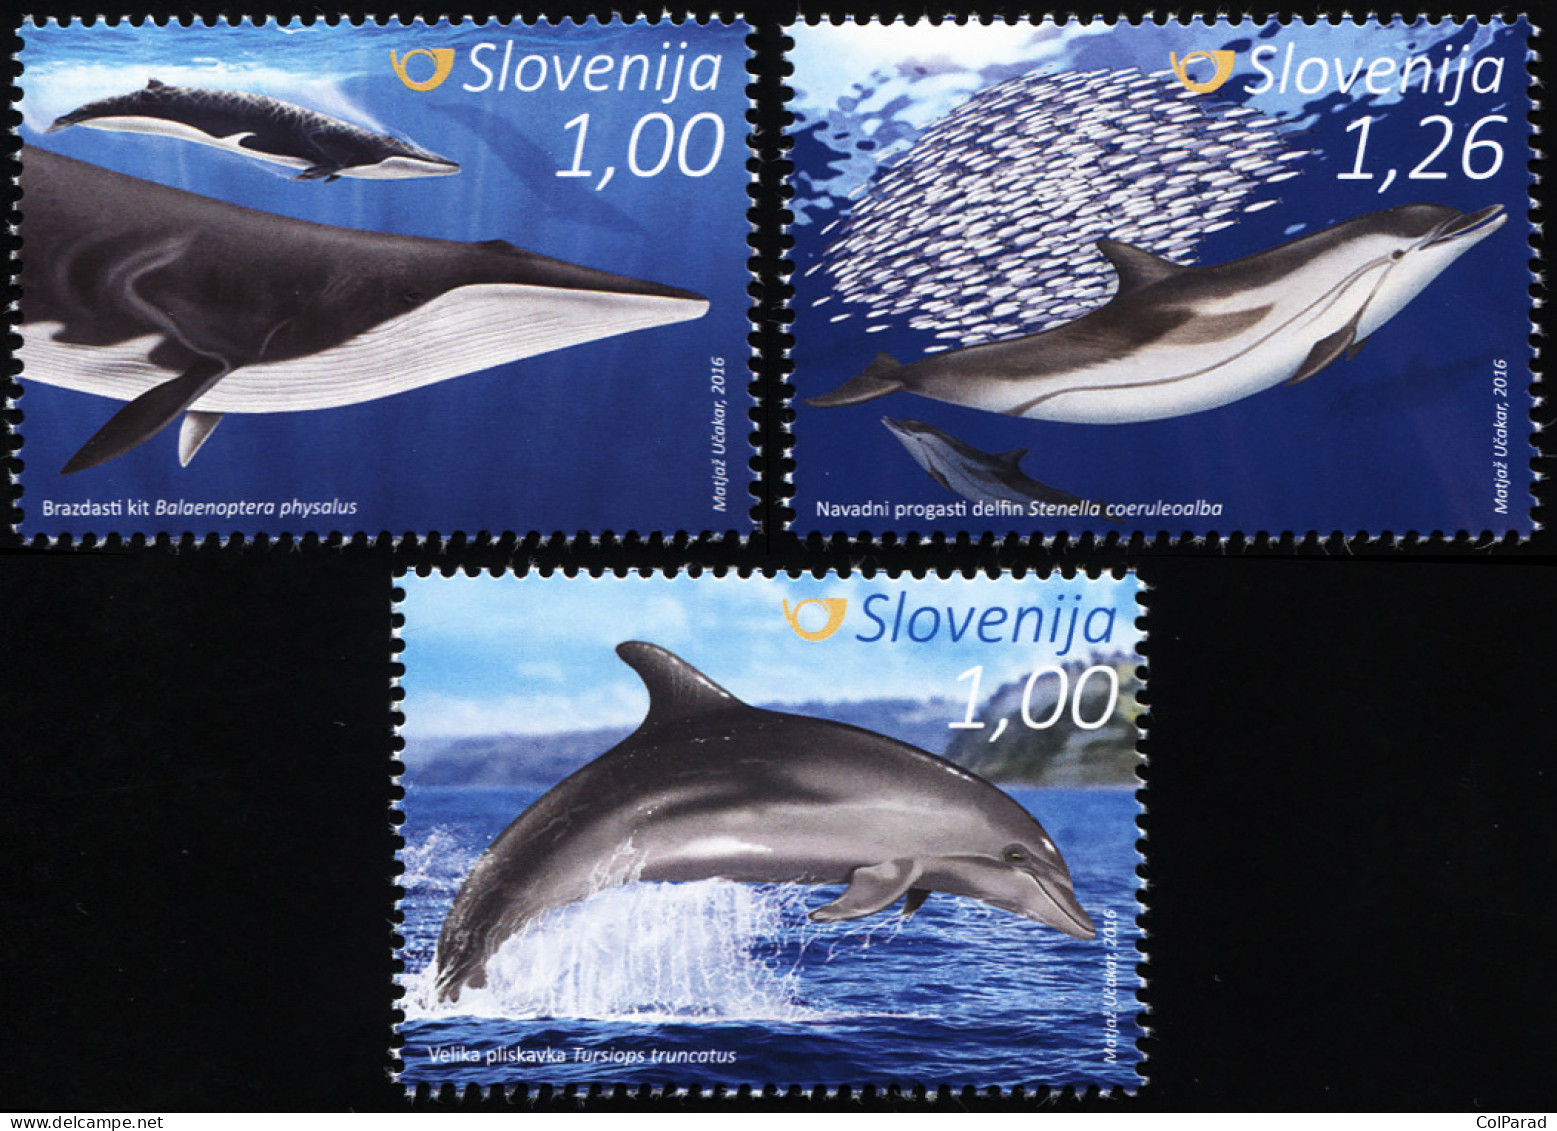 SLOVENIA - 2016 - SET OF 3 STAMPS MNH ** - Dolphins And Whales - Slovénie